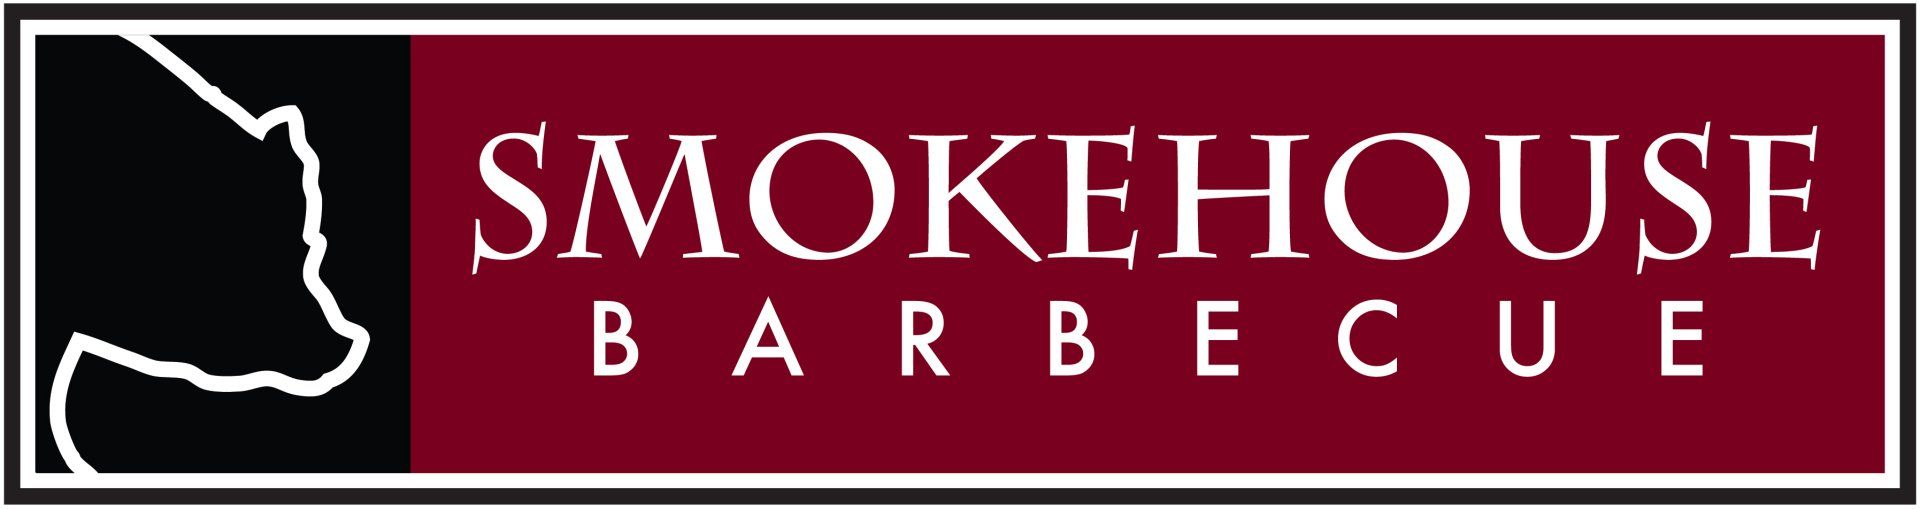 Restaurant Near Me Smokehouse Barbecue Independence